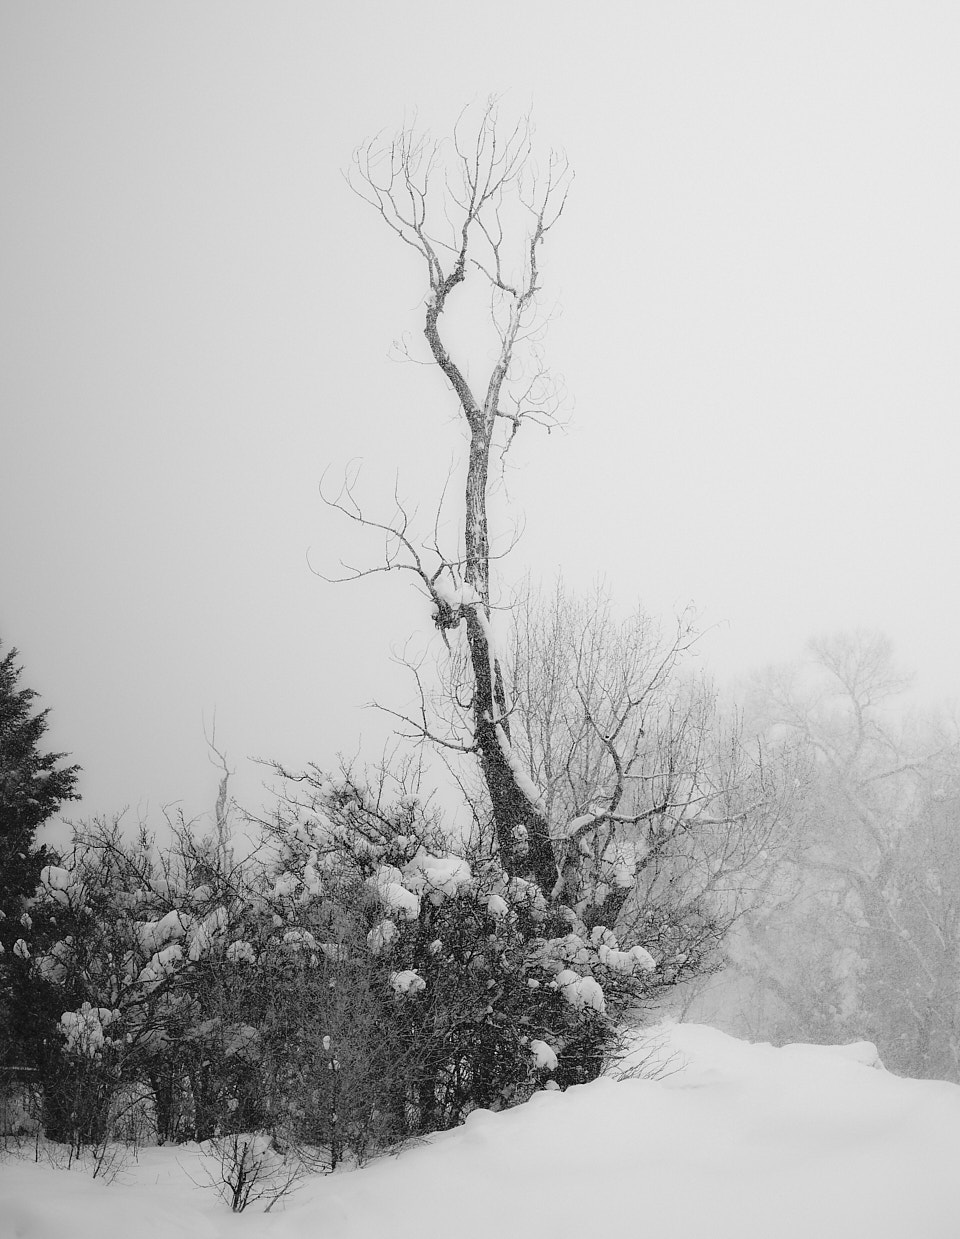 A distinctive tree rising up into the white void during a snowstorm.